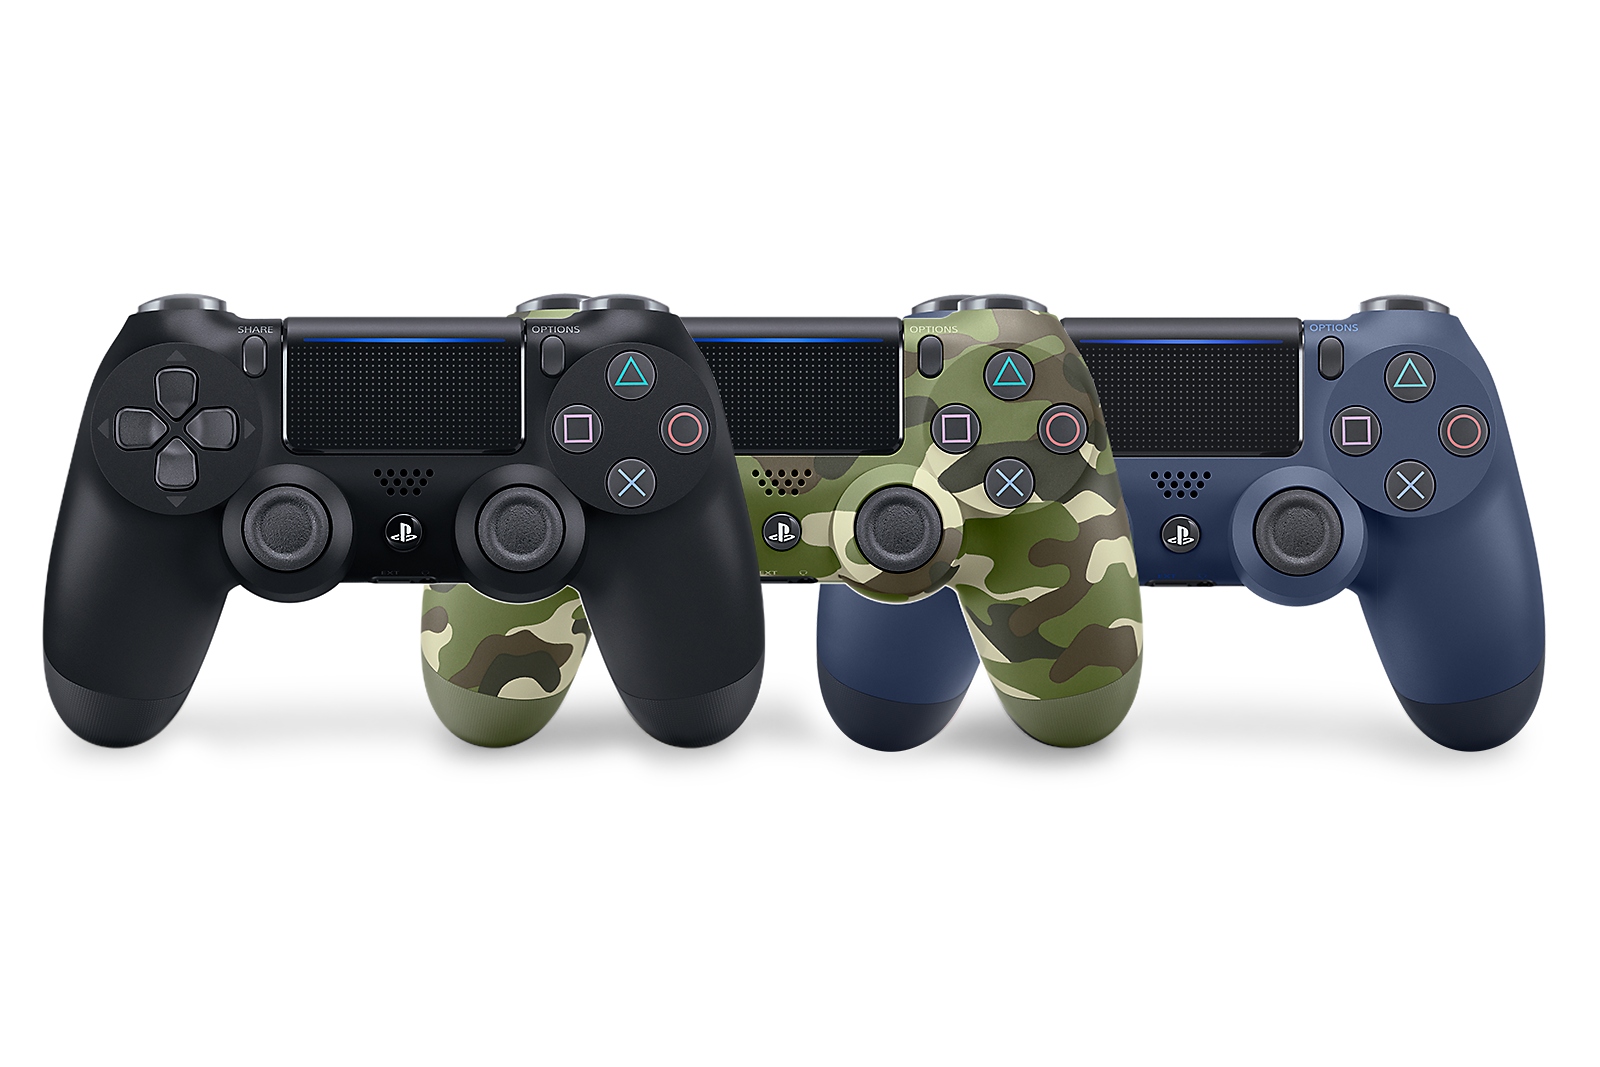 DualShock 4 Wireless Controller Our Sweetest Deal